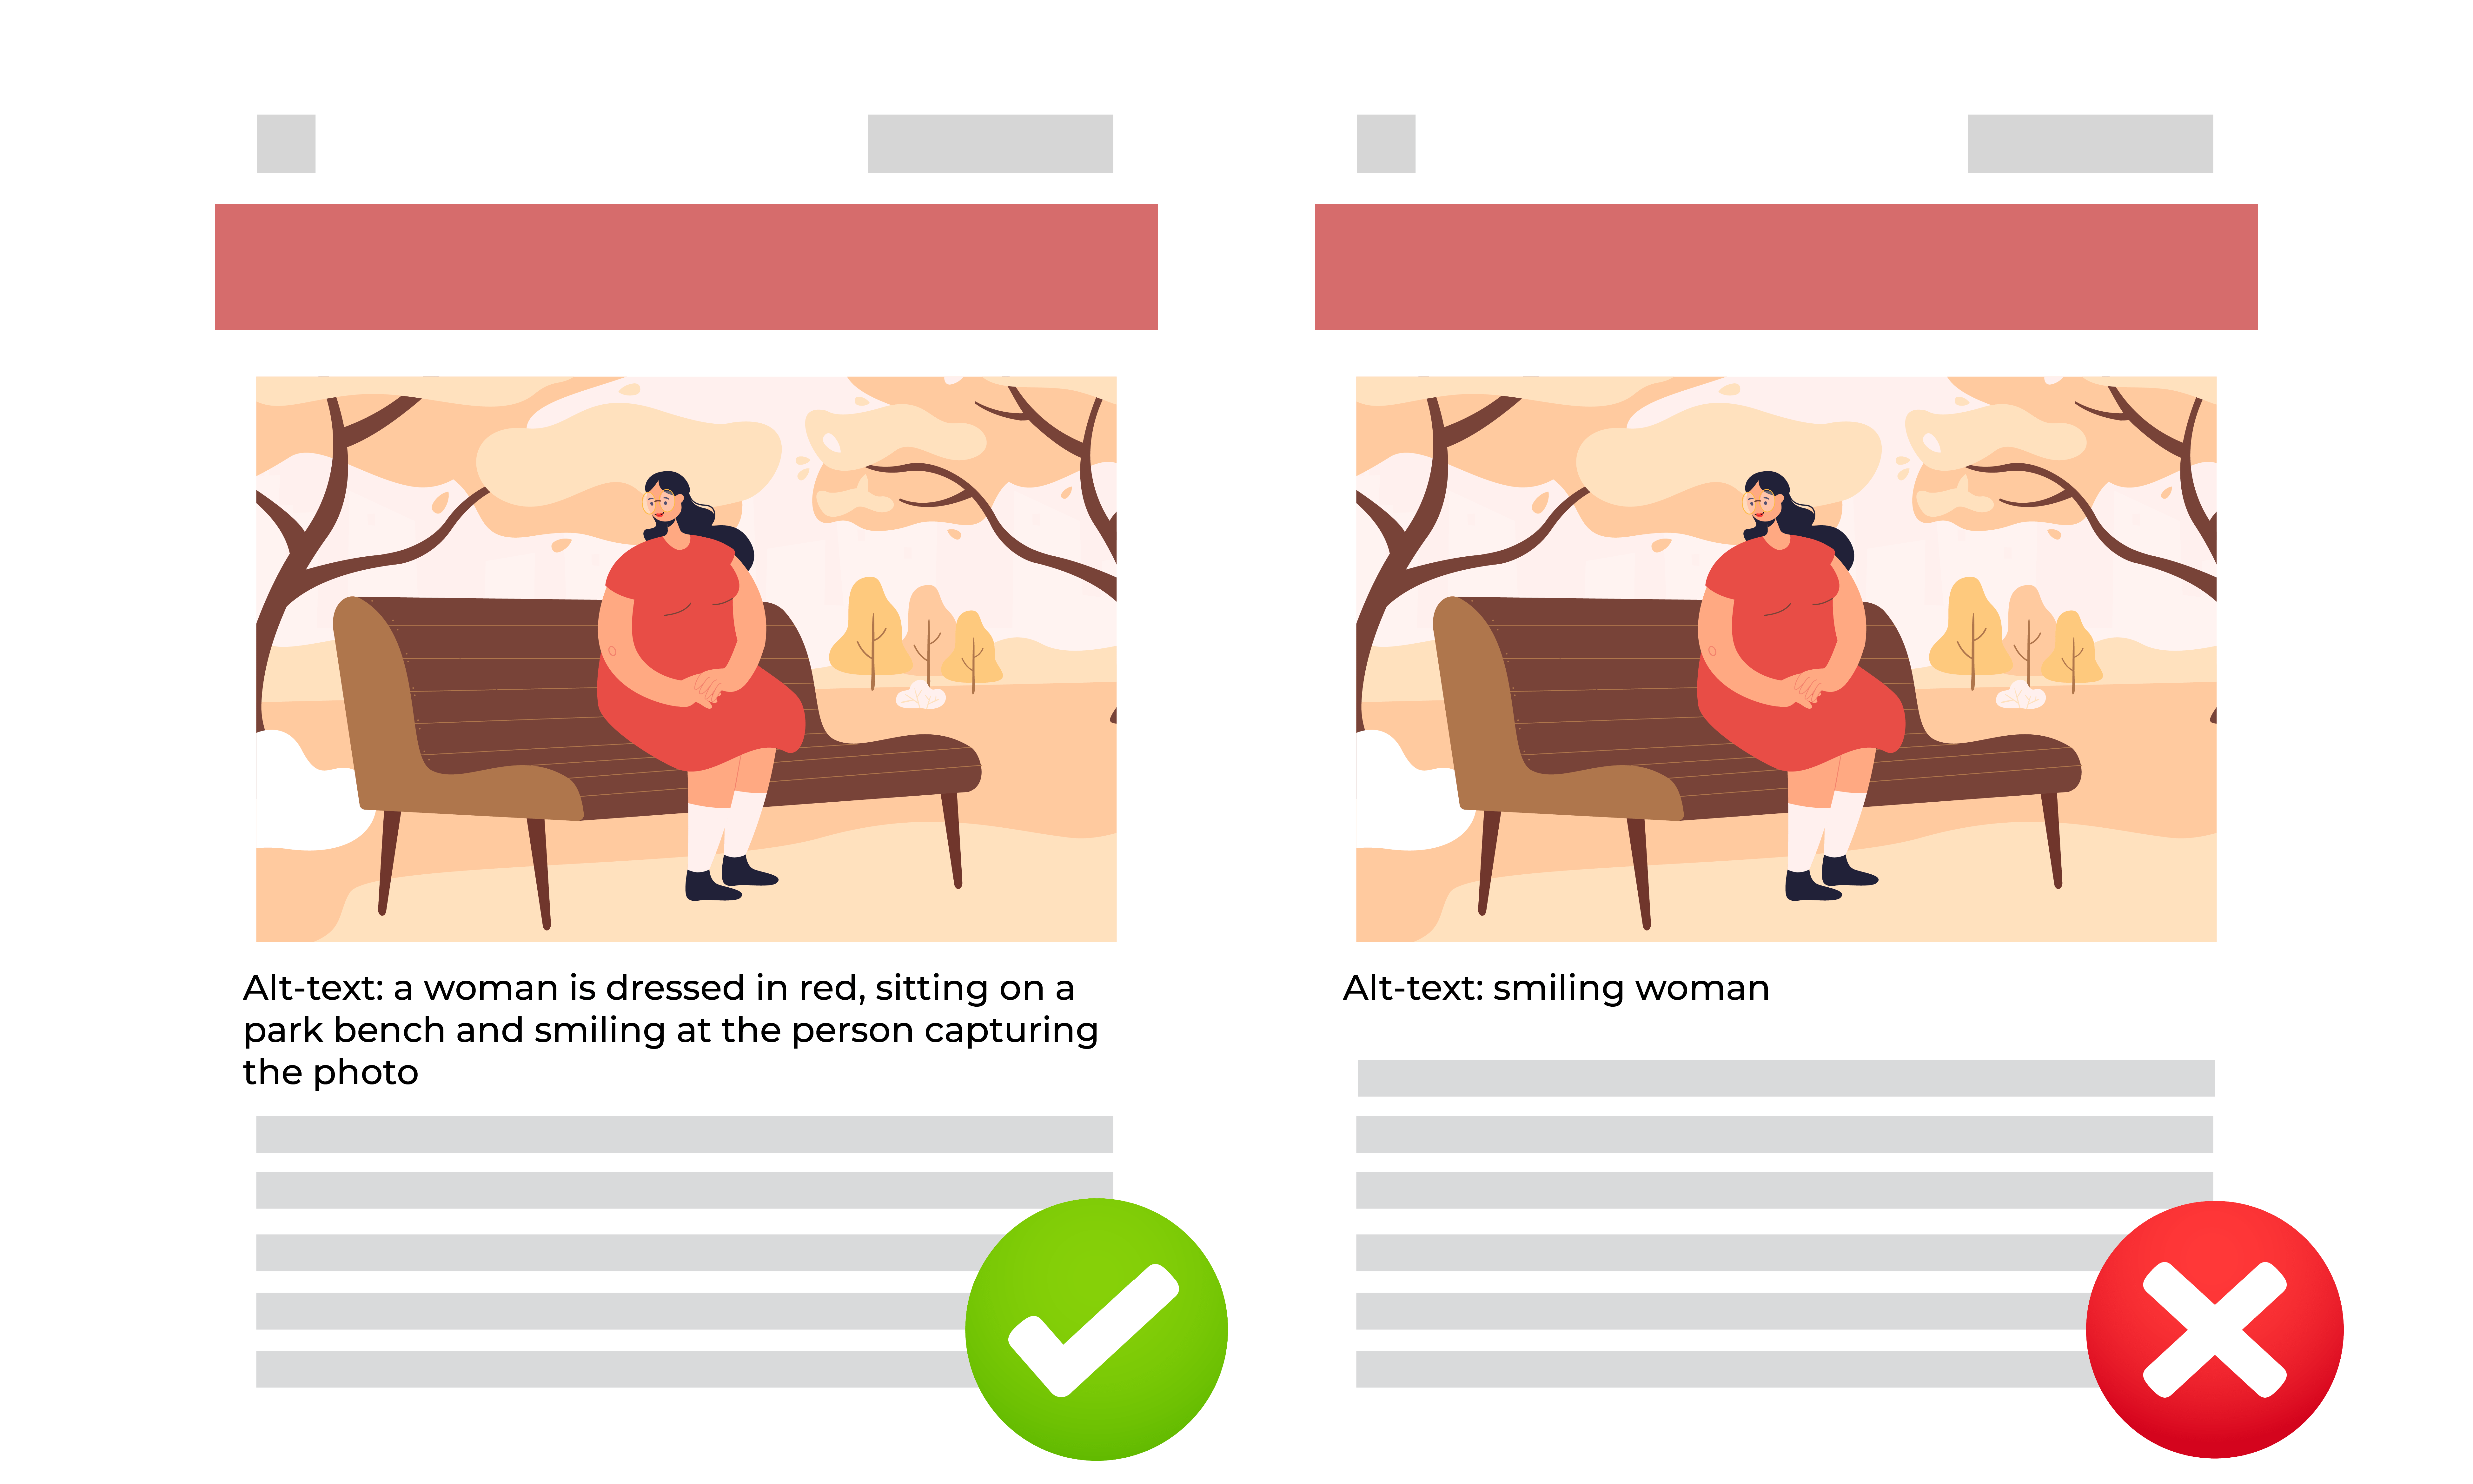 illustration showing the difference between the good example of alt text of the woman sitting on the park bench versus the bad example